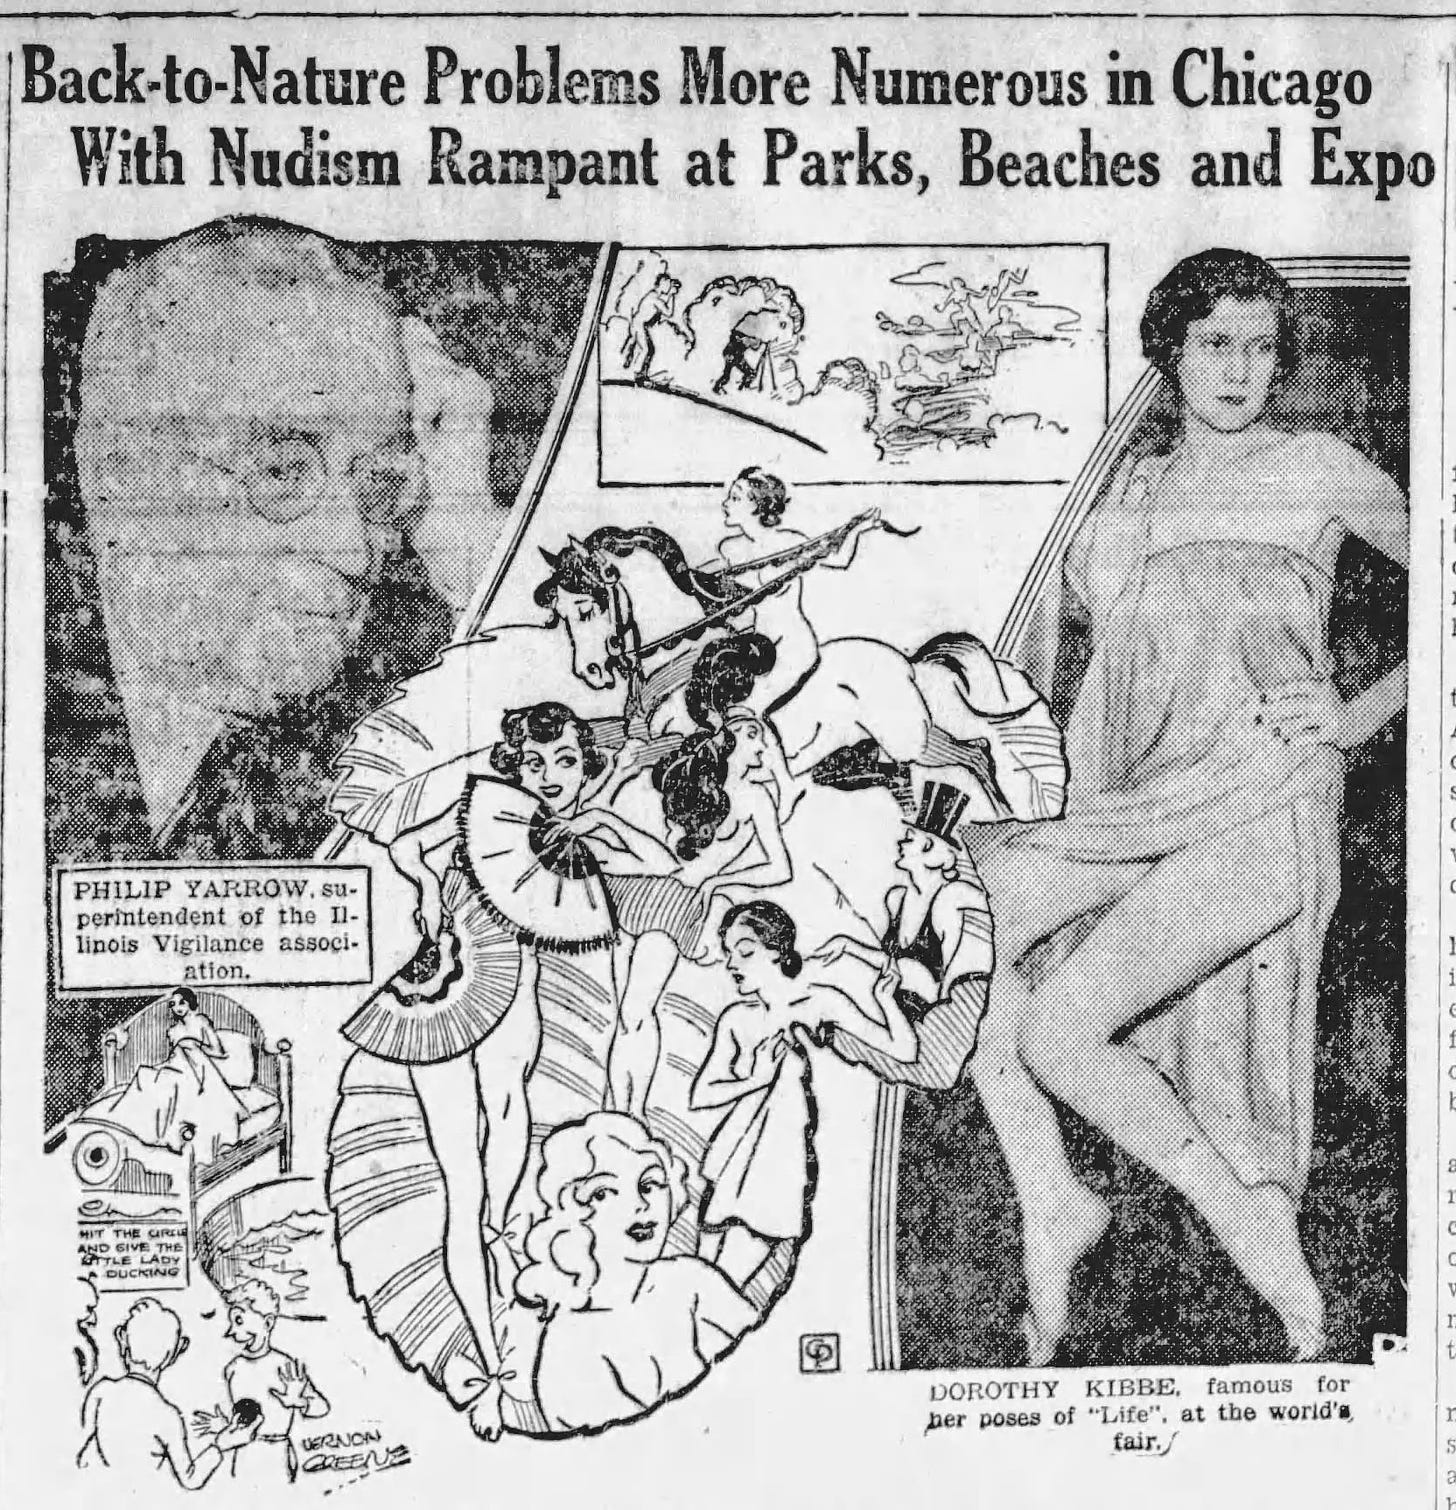 Philip Yarrow is pictured in a photo collage featuring modest drawings of nude women. The headline reads: Back-to-Nature Problems More Numerous in Chicago with Nudism Rampant at Parks, Beaches, Expo. 